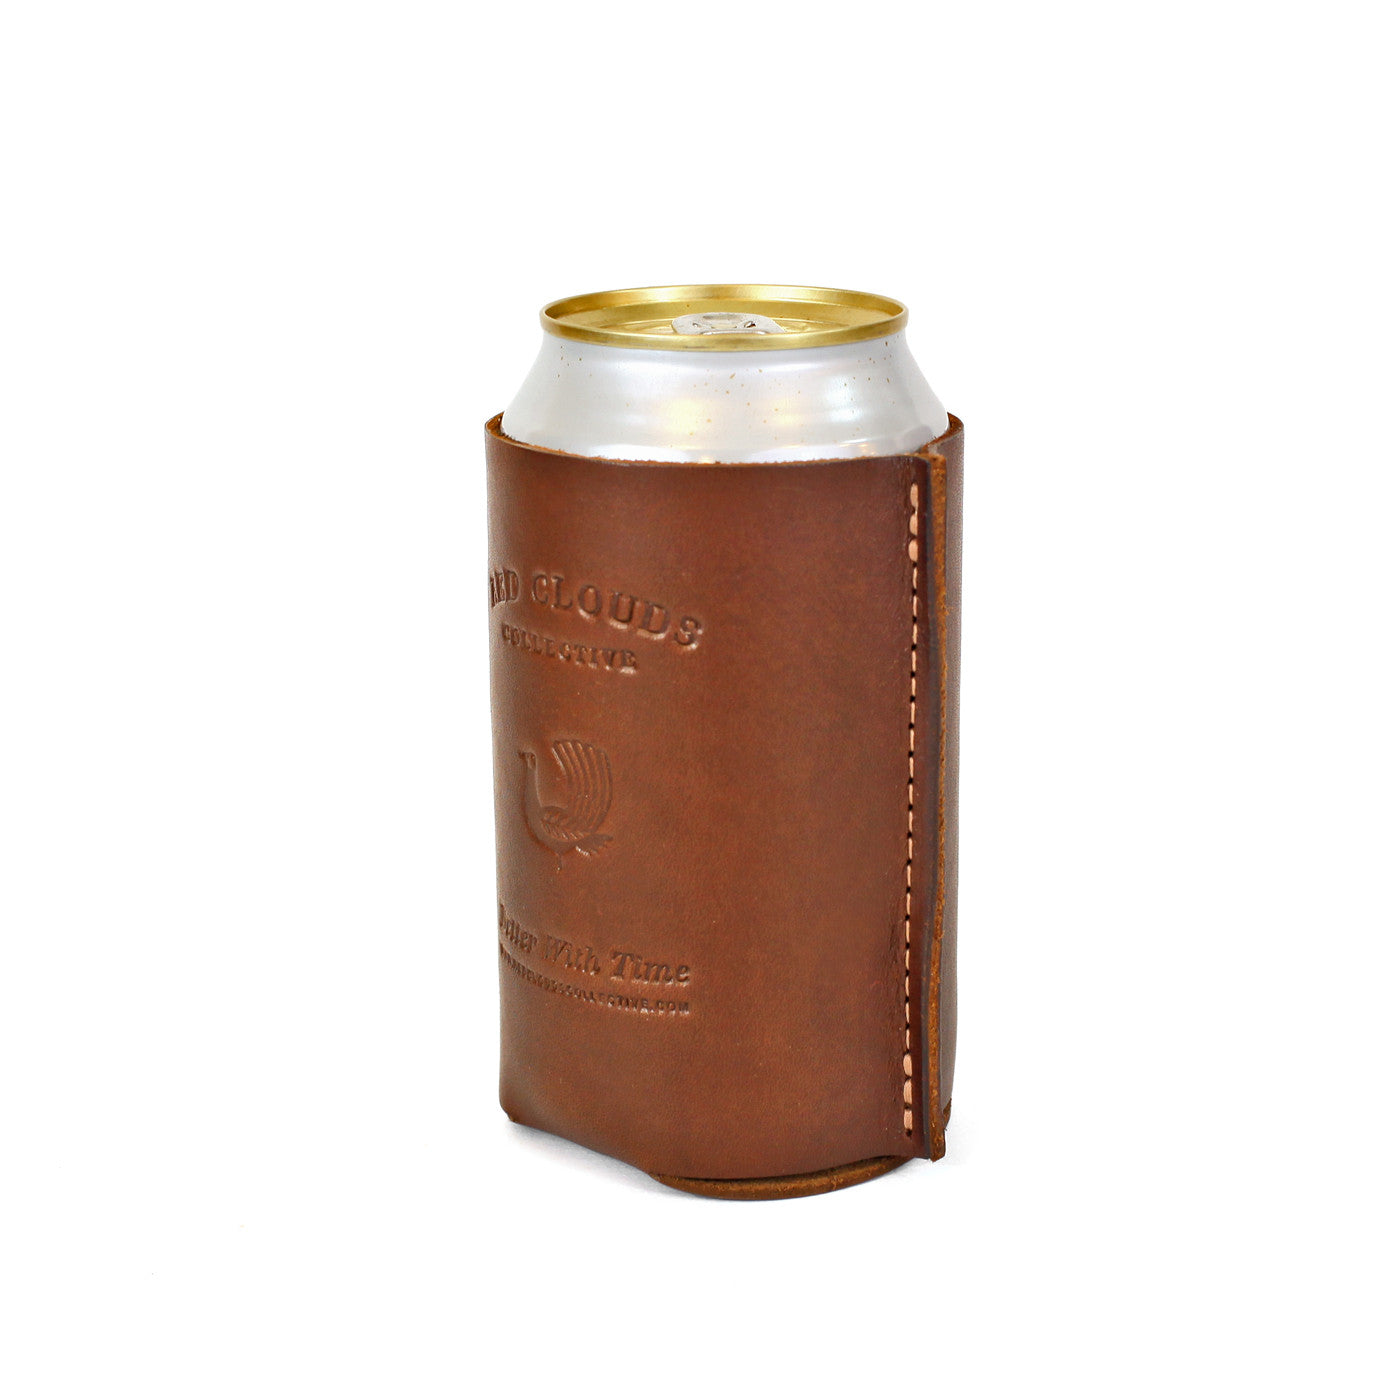 leather koozie, leather can, leather coozie, coaster, leather beer holder, leather bottle koozie, made in usa, tan leather